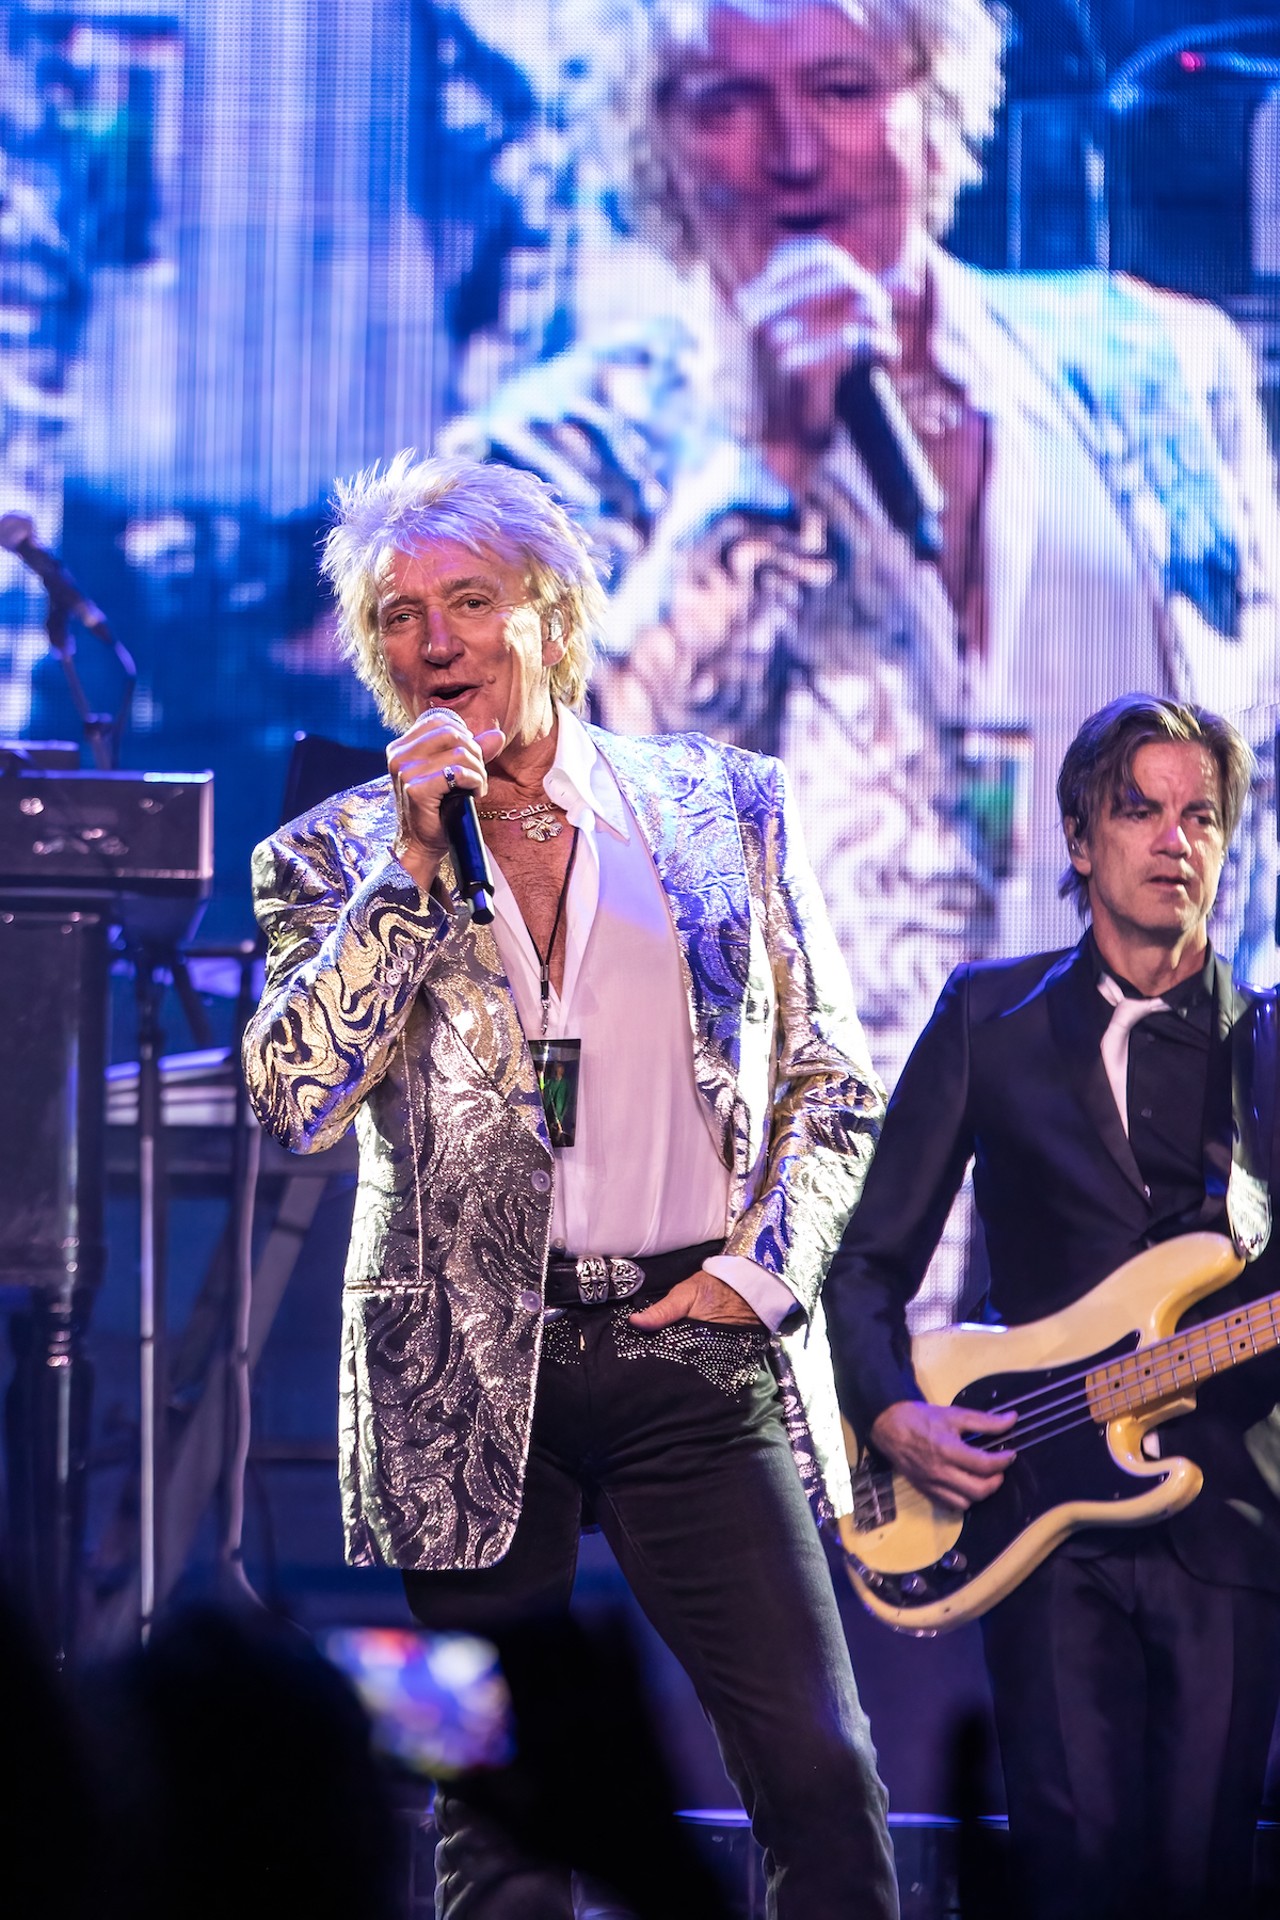 Review: At Tampa Hard Rock, Rod Stewart relishes being on ‘the smallest stage I’ve played on in a long time’